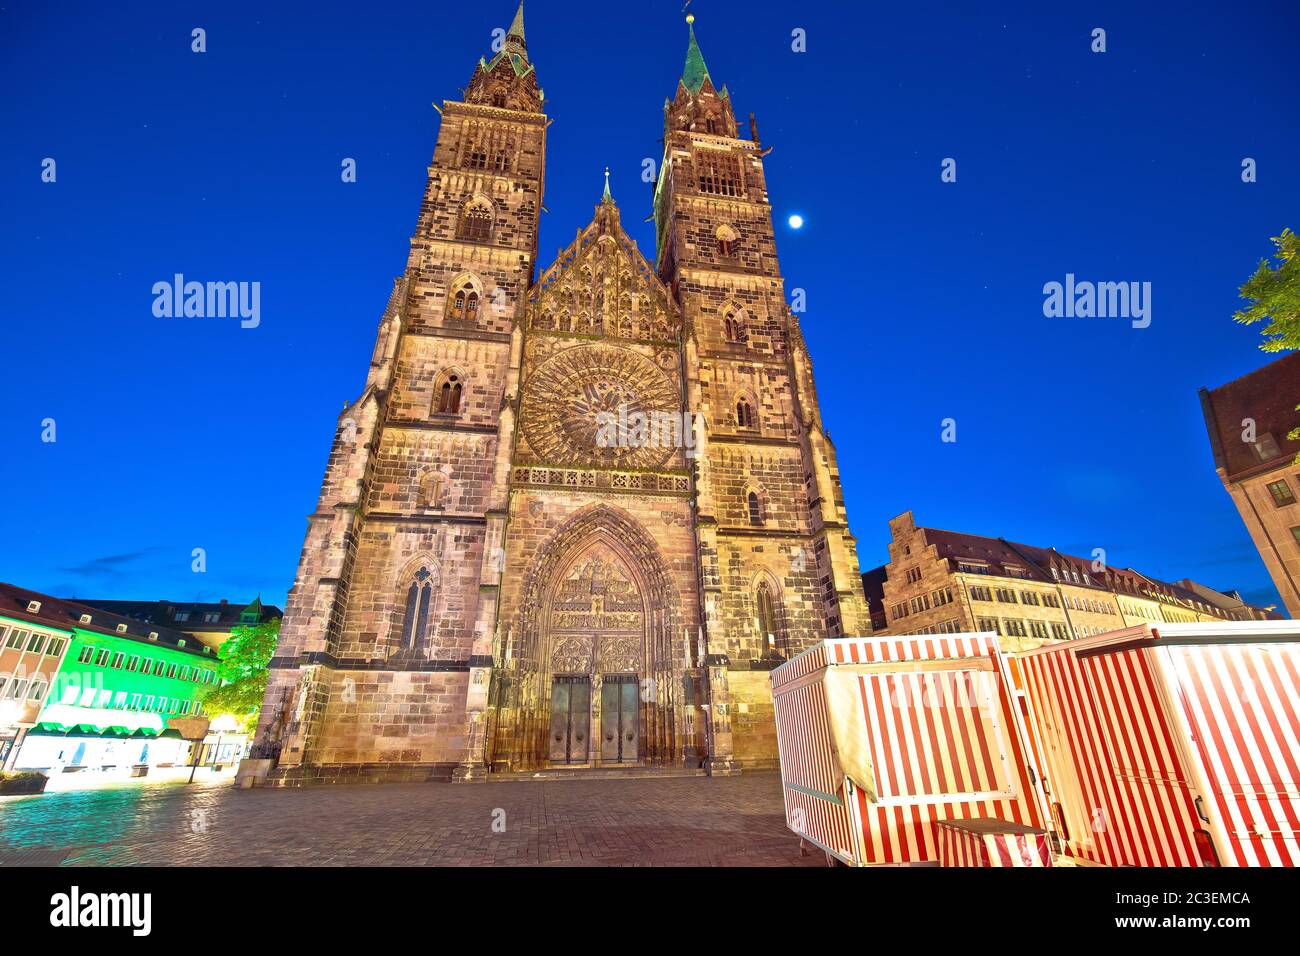 Nurnberg. St. Lorenz church and square architecture night view in Nuremberg Stock Photo